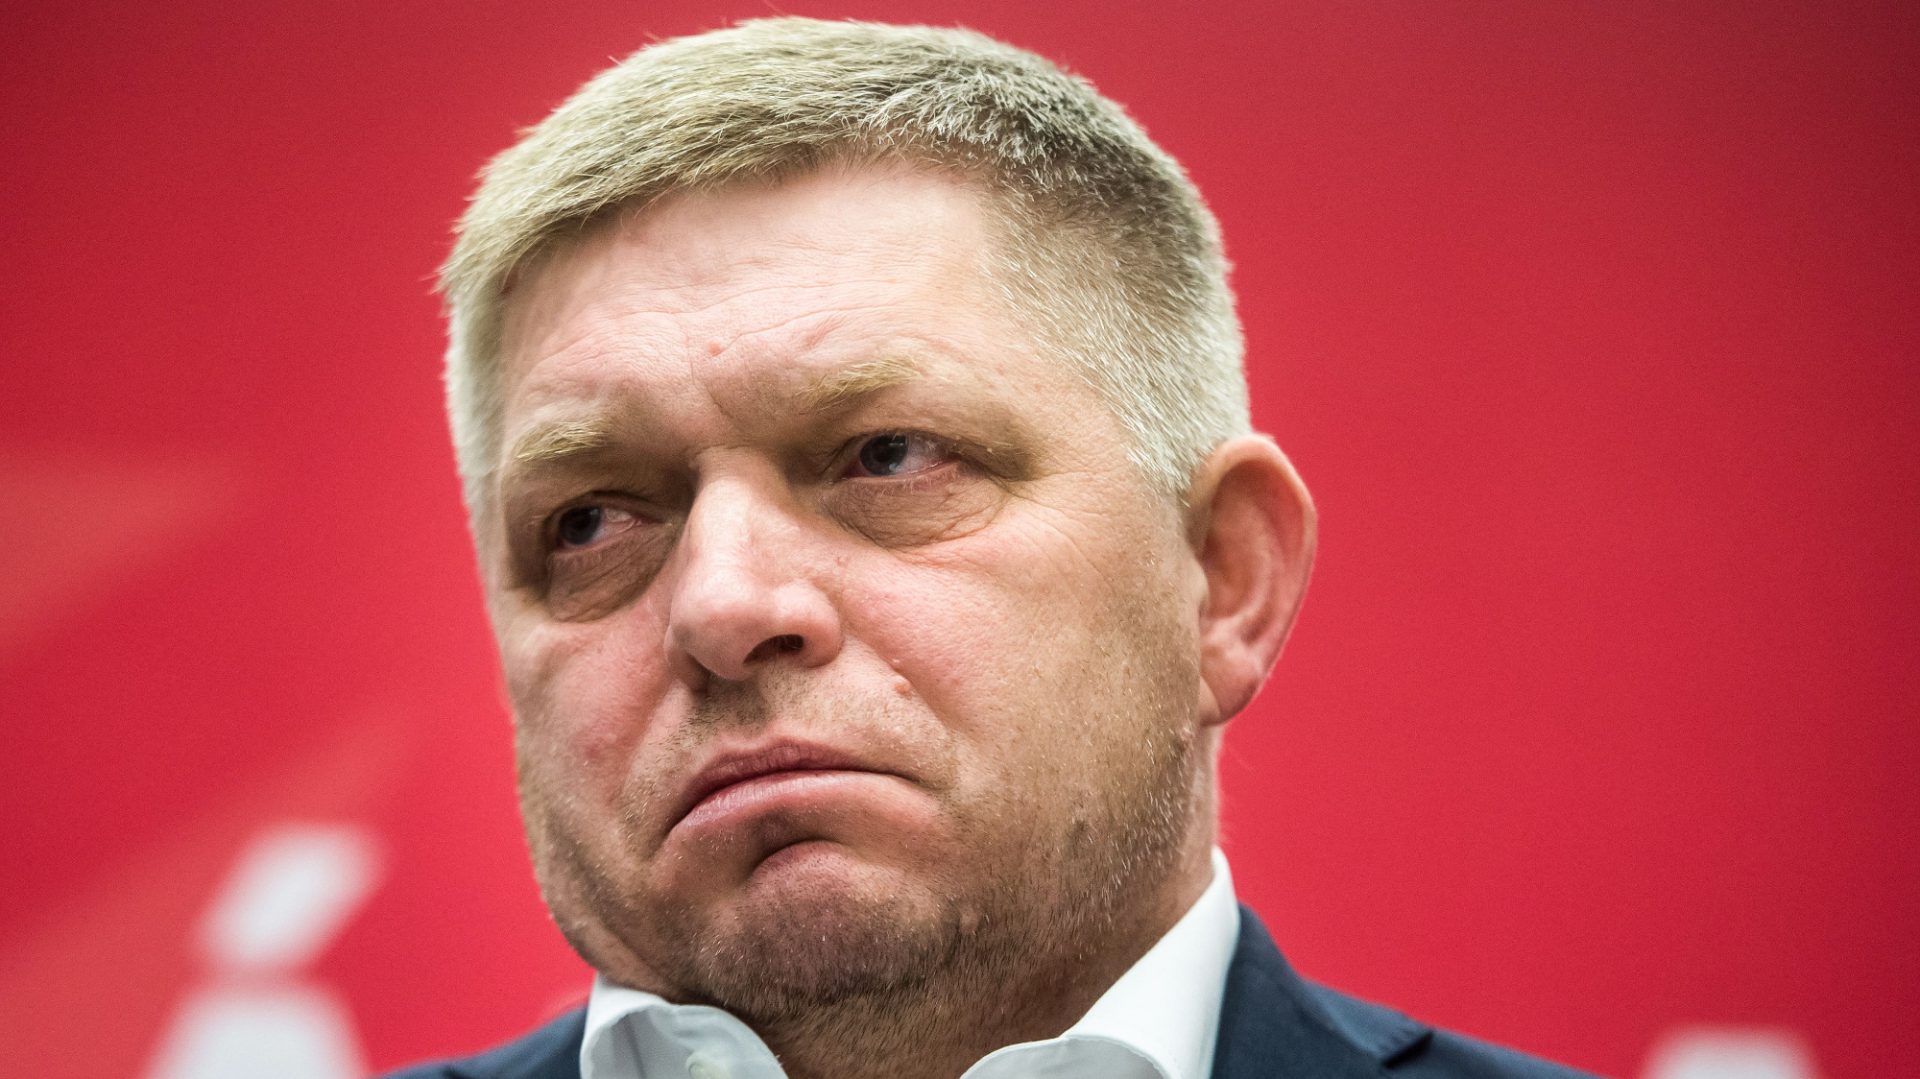 Robert Fico is now in his fourth term as prime minister in Slovakia. Photo: Vladimir Simicek/AFP/Getty